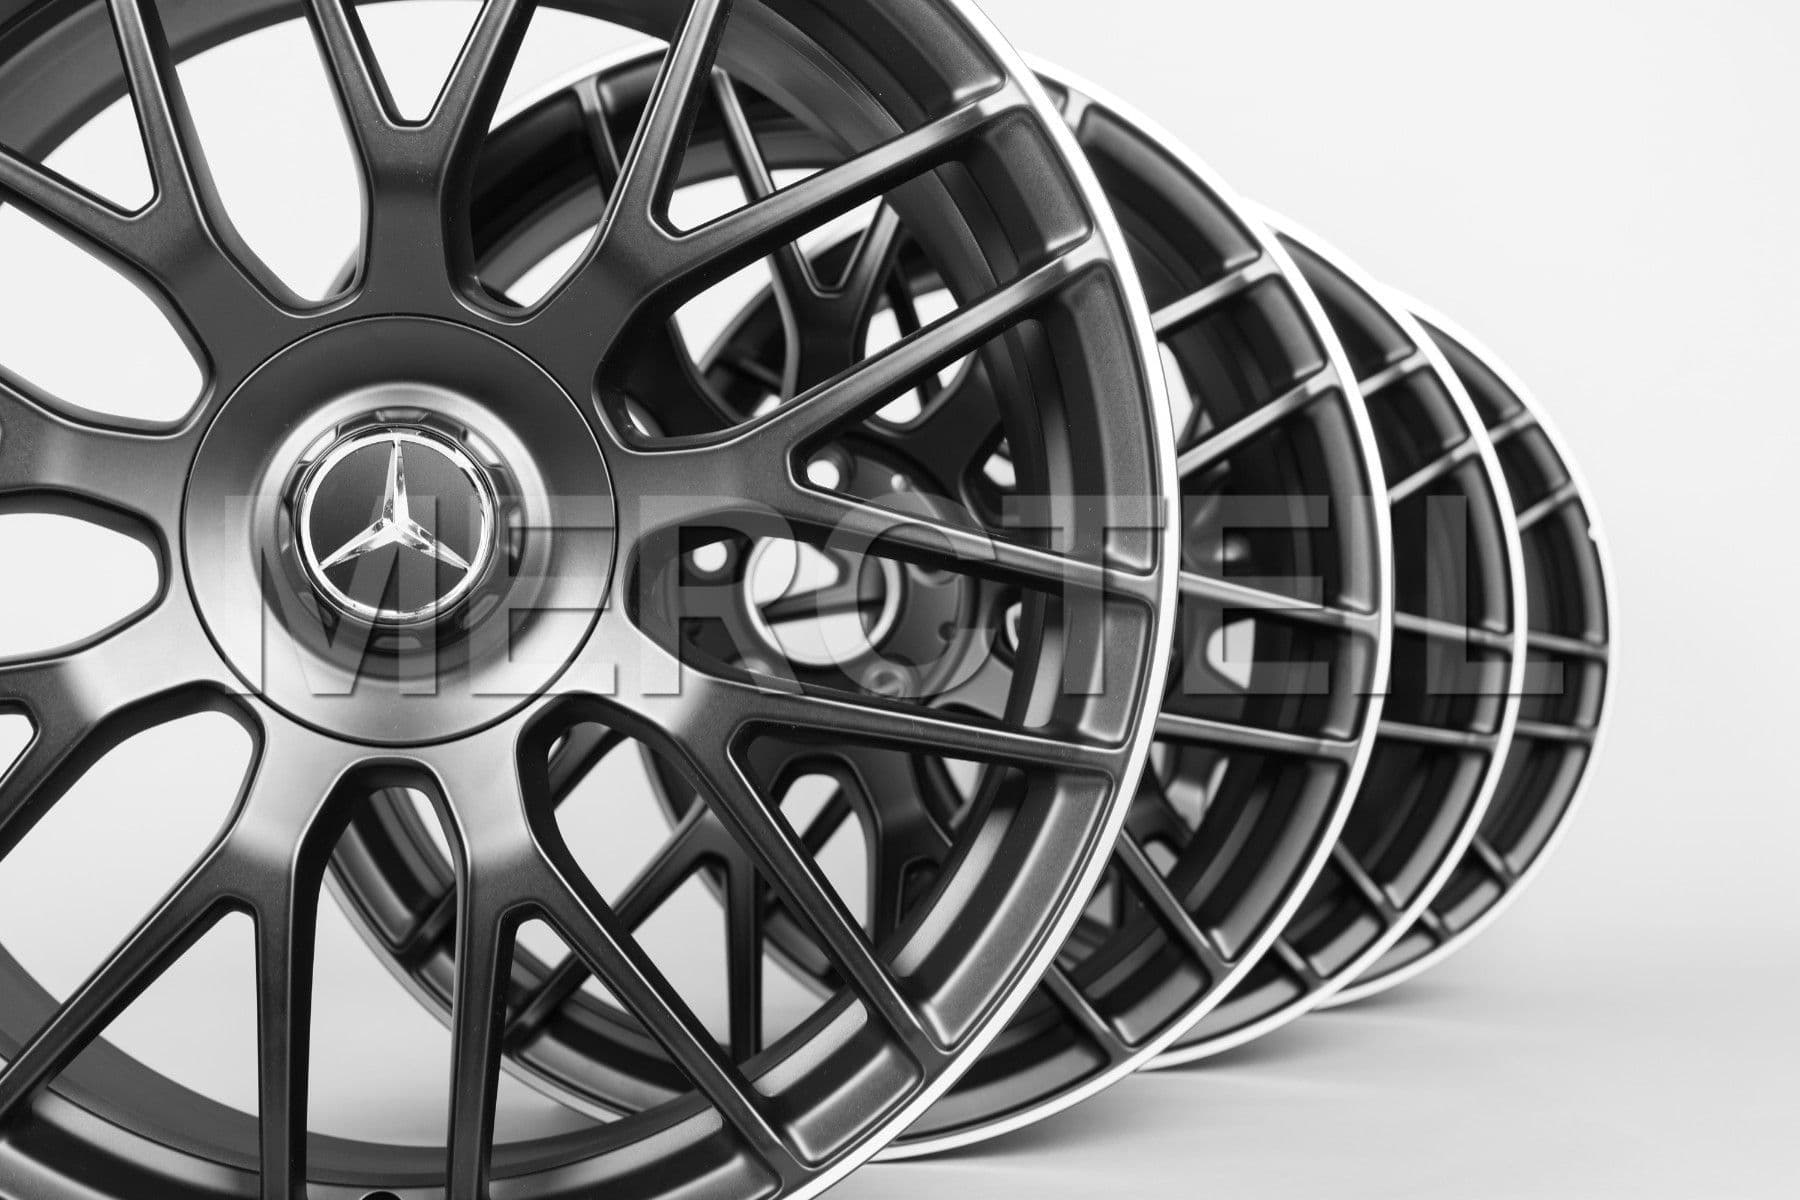 CLS63 Wheels Forged Black C218 Genuine Mercedes Benz (part number: 	
A21840118007X71)